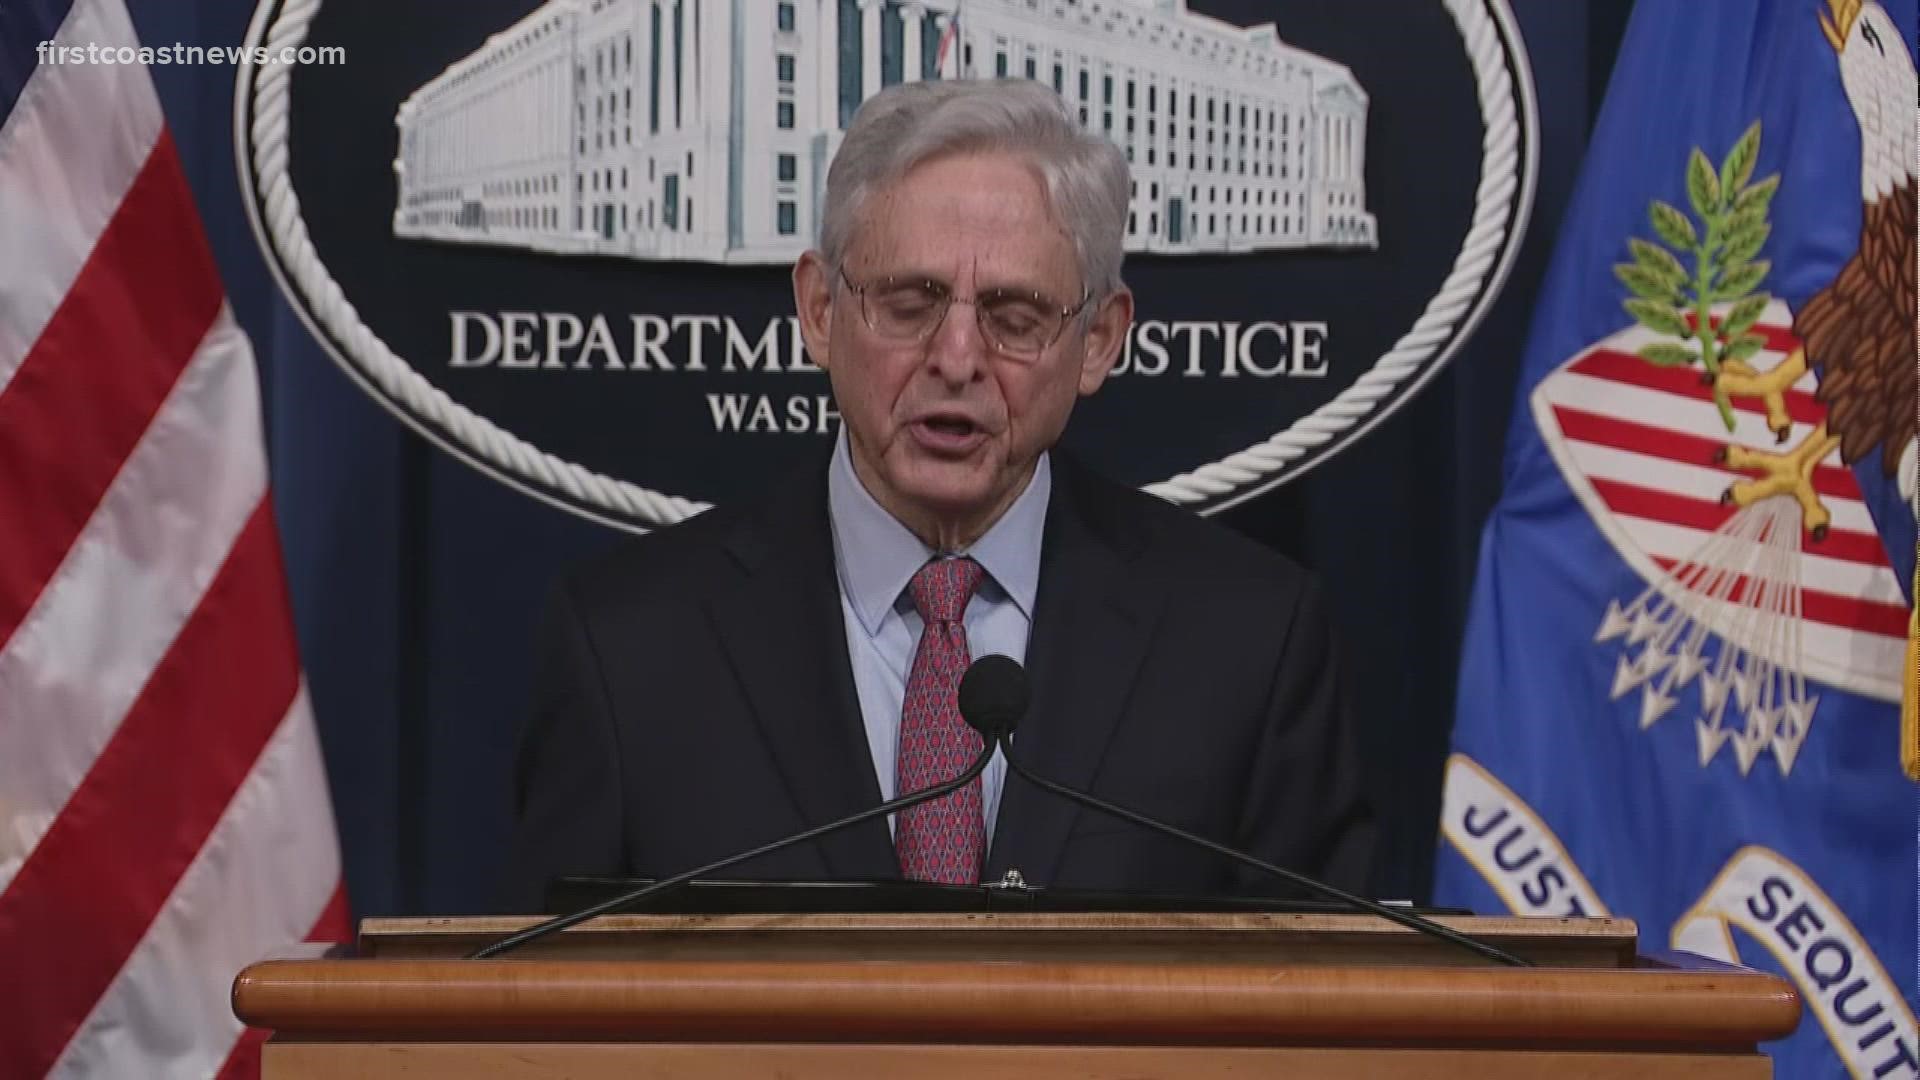 During a news conference Tuesday from Washington, D.C., U.S. Attorney General Merrick Garland gave a statement after Ahmaud Arbery's killers were convicted.